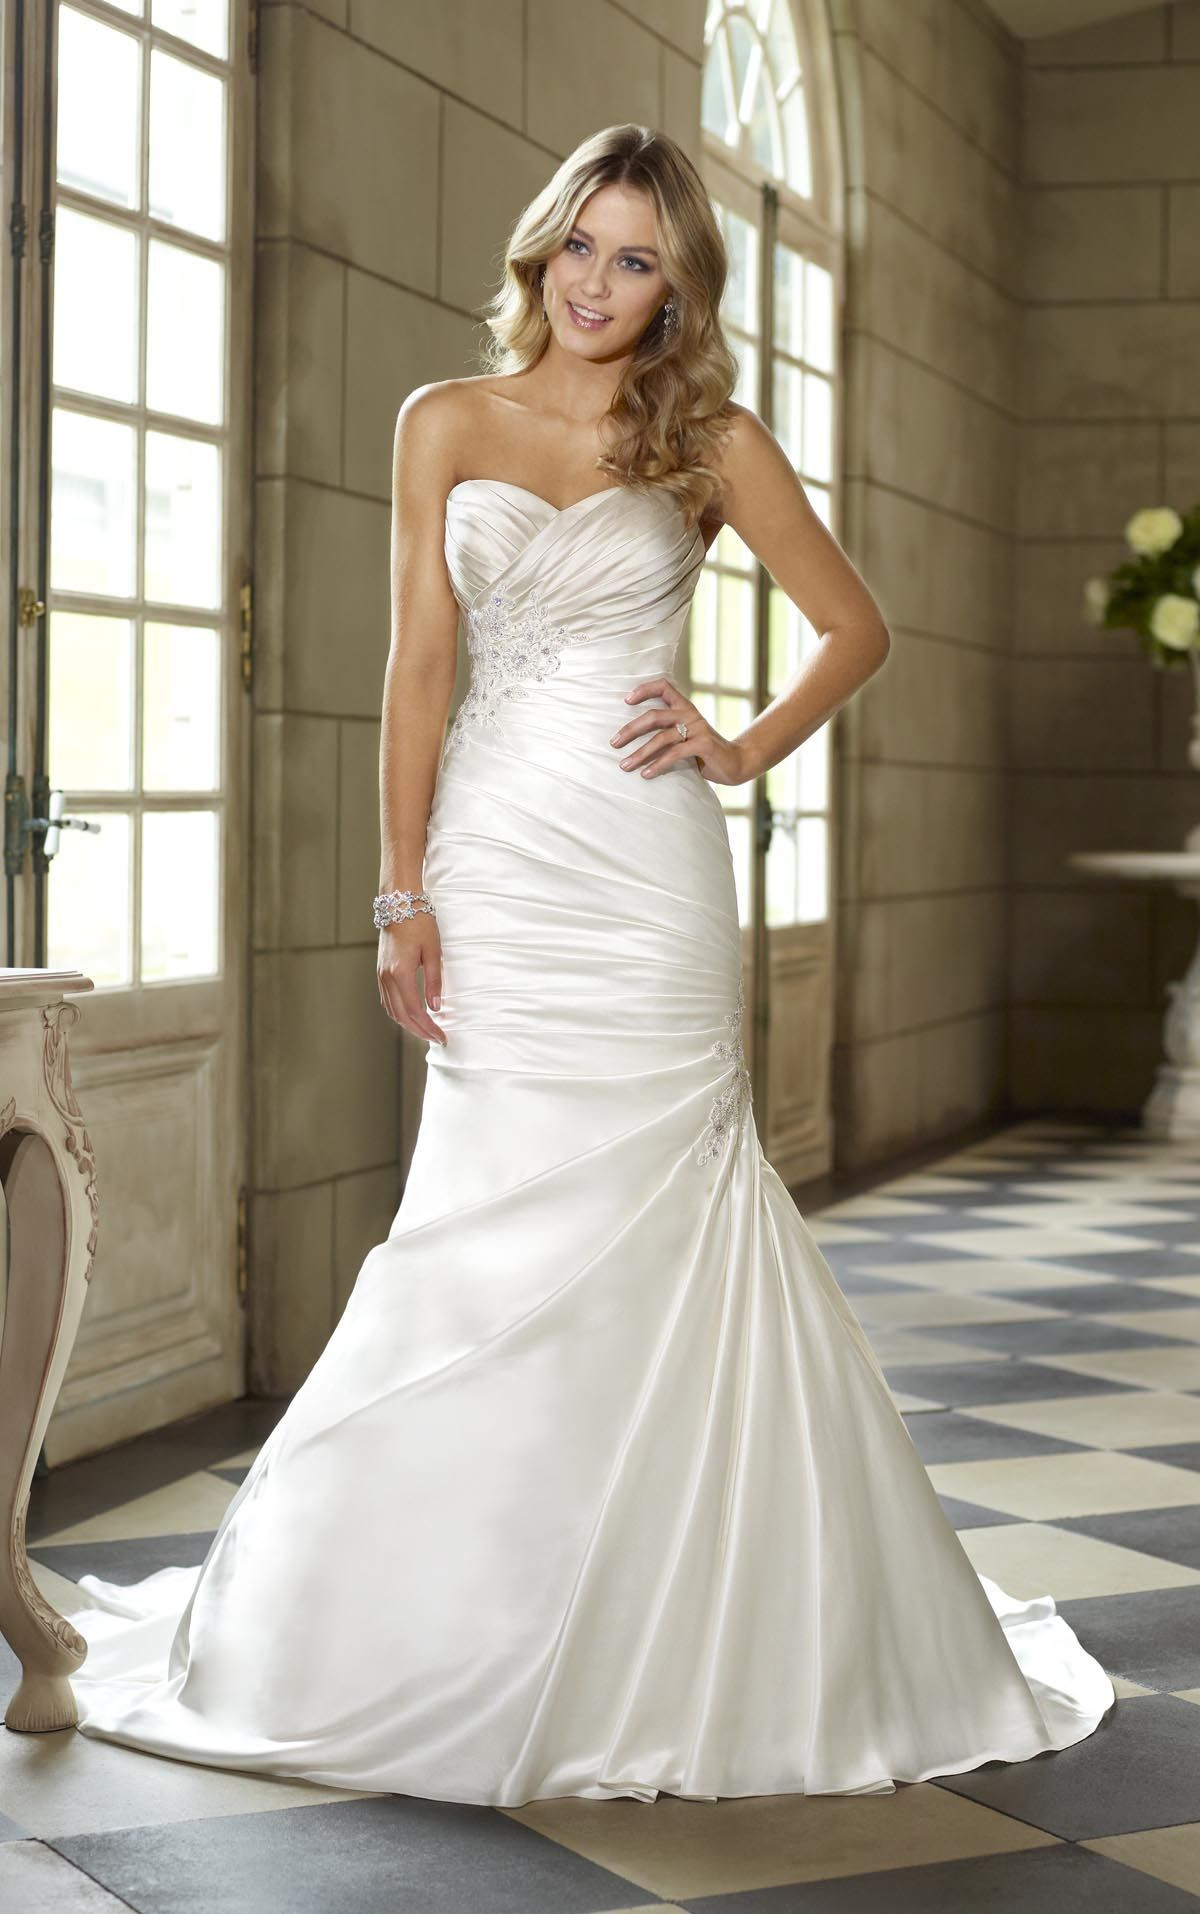 Ruched Wedding Gowns
 Wedding dress with side ruching WEDDING DRESSES